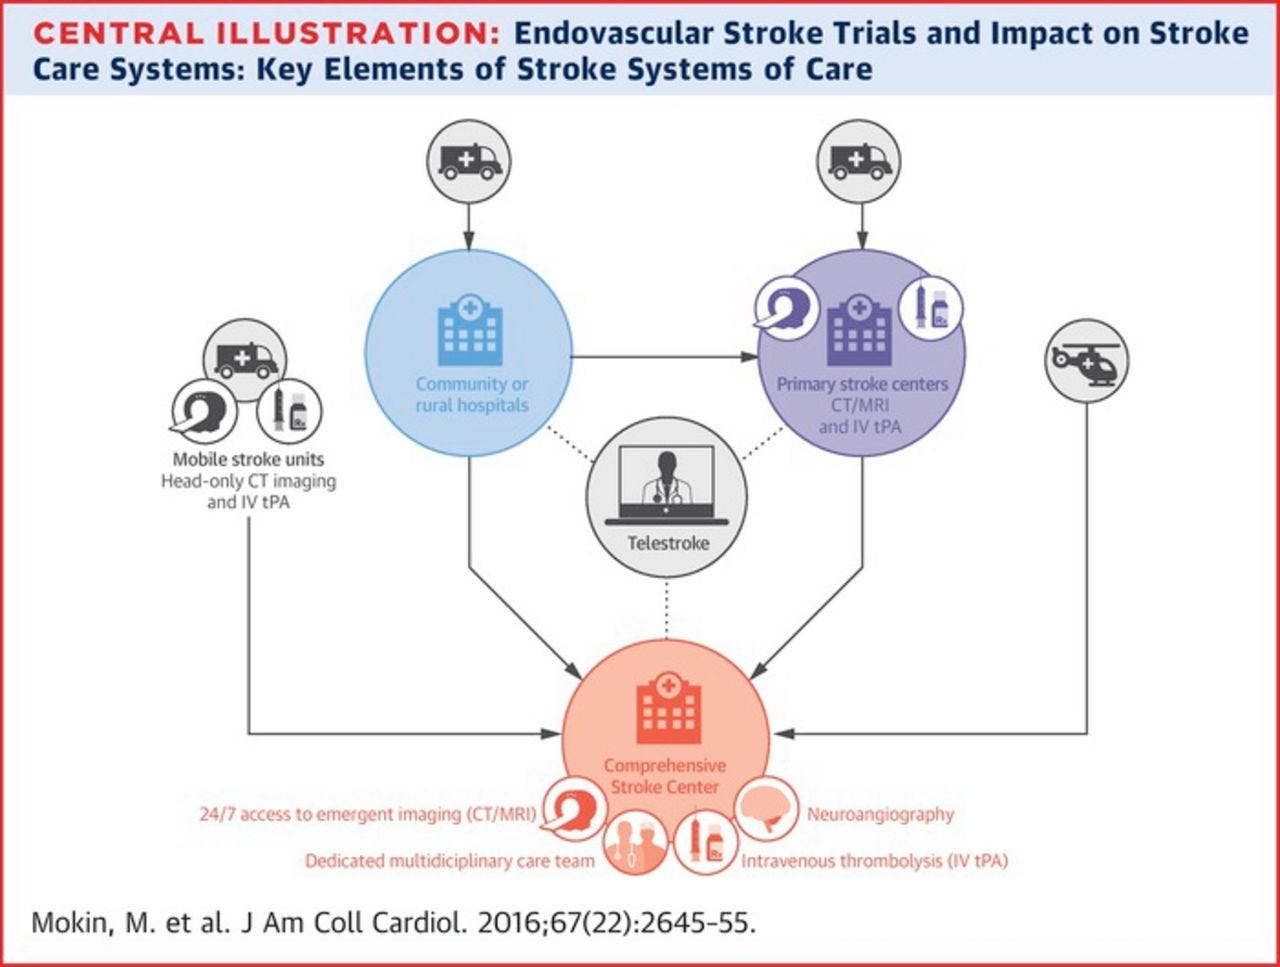 Recent Endovascular Stroke Trials and Their Impact on Stroke Systems of  Care | JACC: Journal of the American College of Cardiology